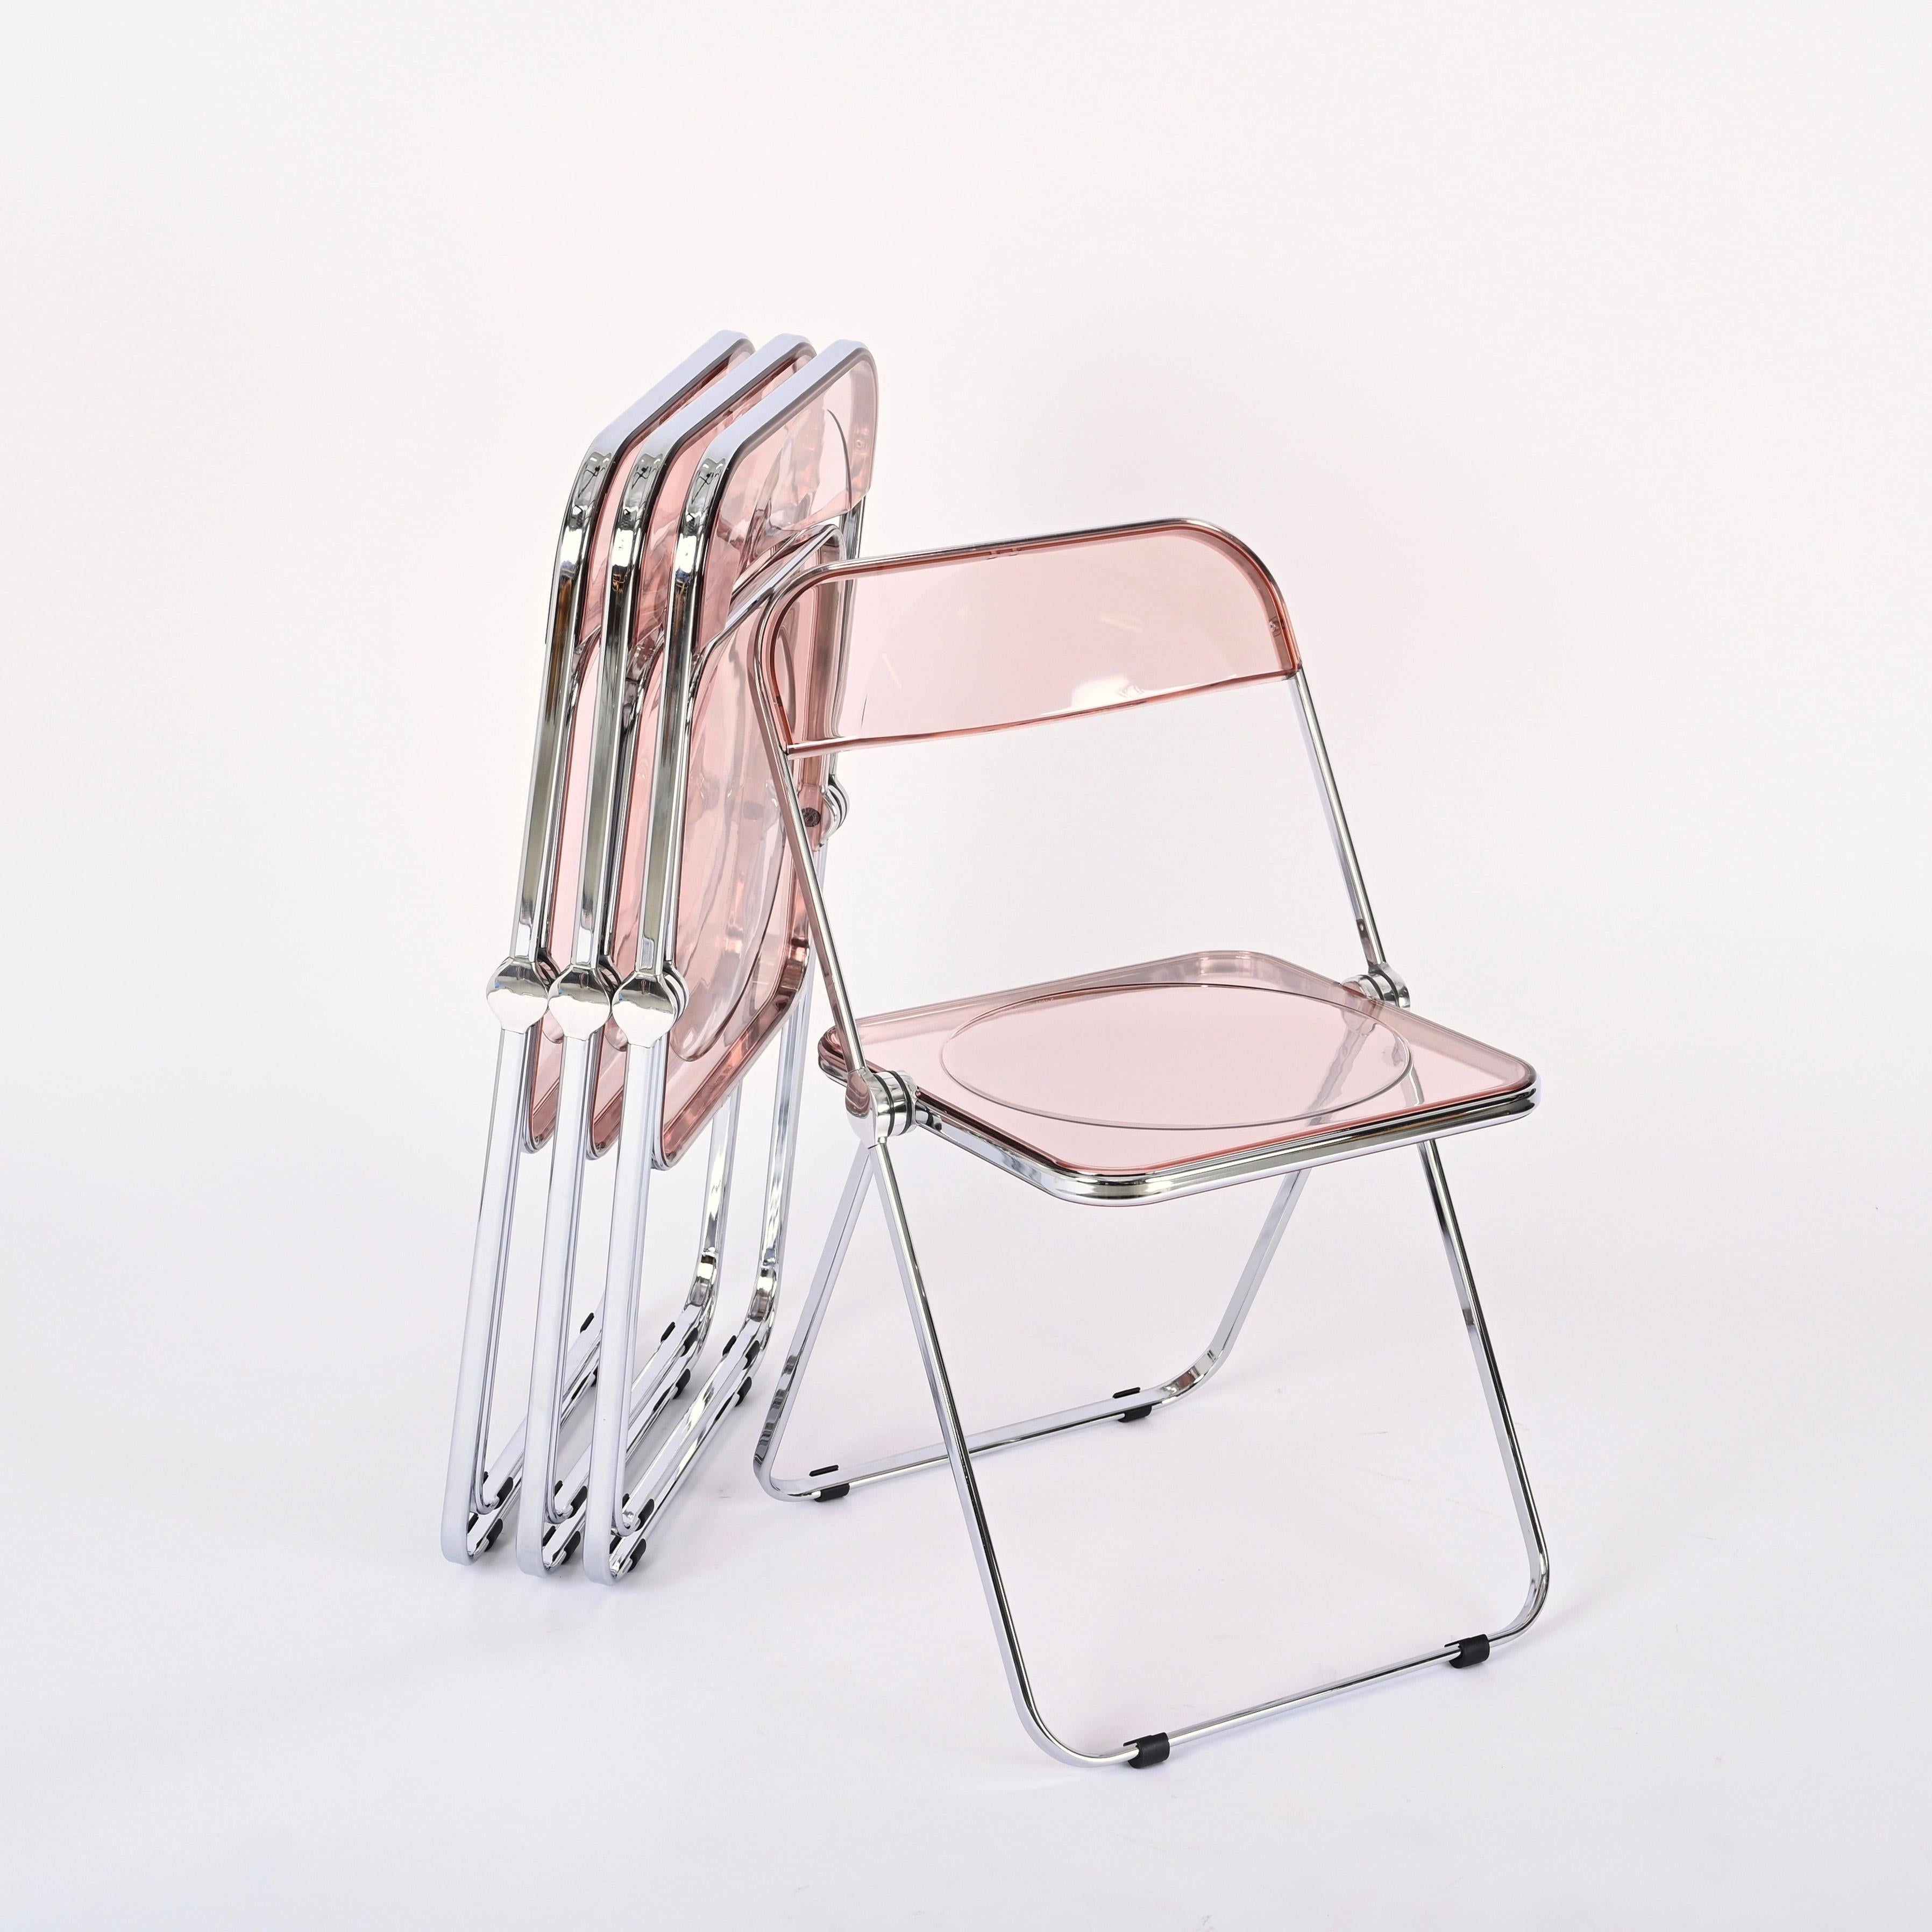 20th Century Set of 4 Lucite Pink and Chrome Plia Chairs, Piretti for Castelli, Italy 1970s For Sale